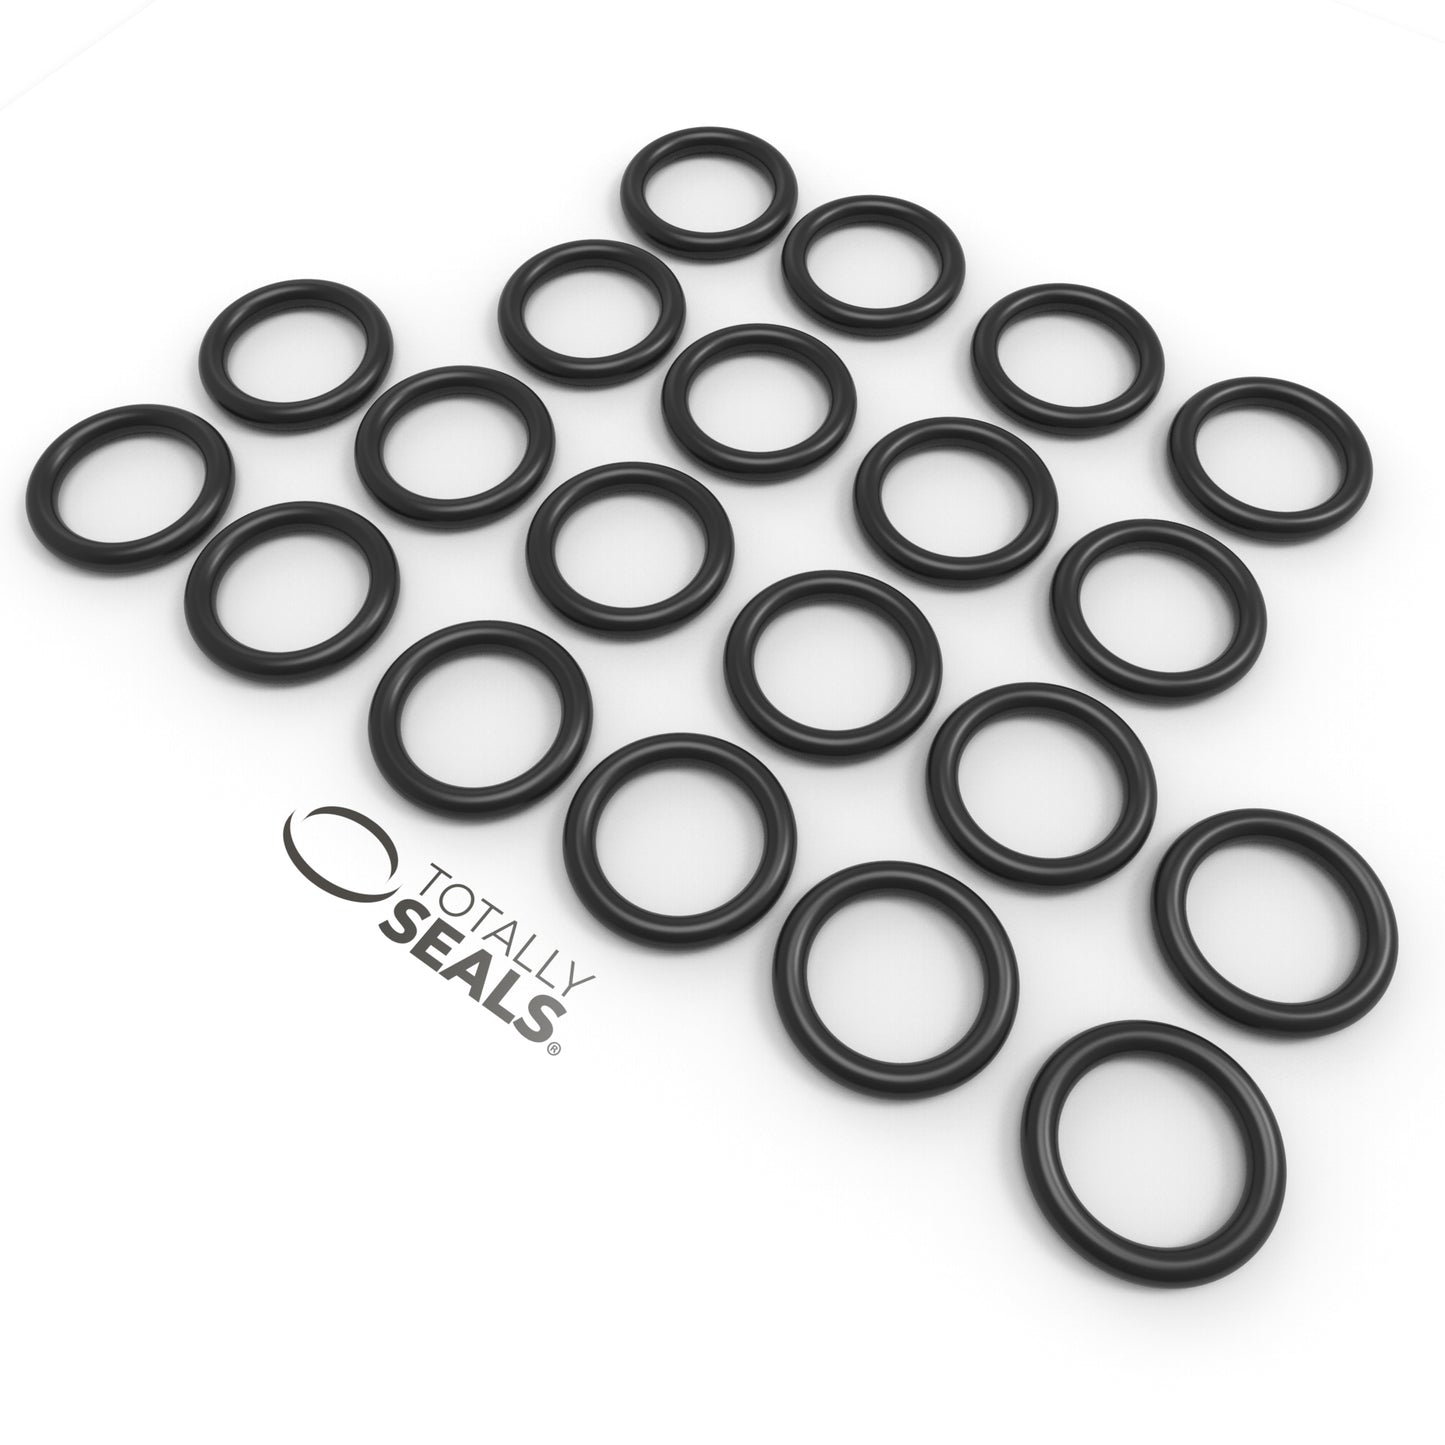 70mm x 5mm (80mm OD) Nitrile O-Rings - Totally Seals®